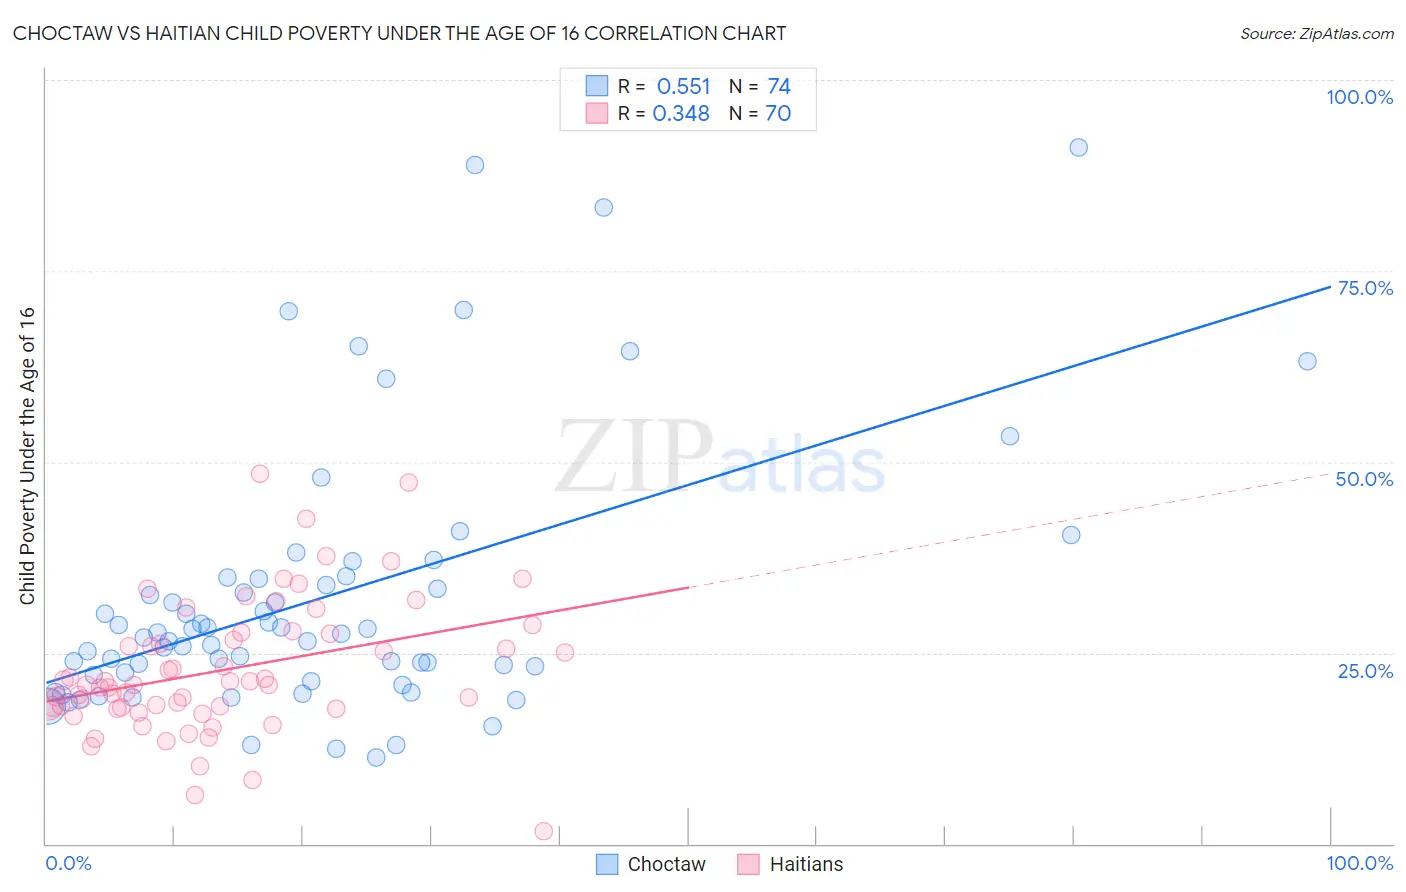 Choctaw vs Haitian Child Poverty Under the Age of 16